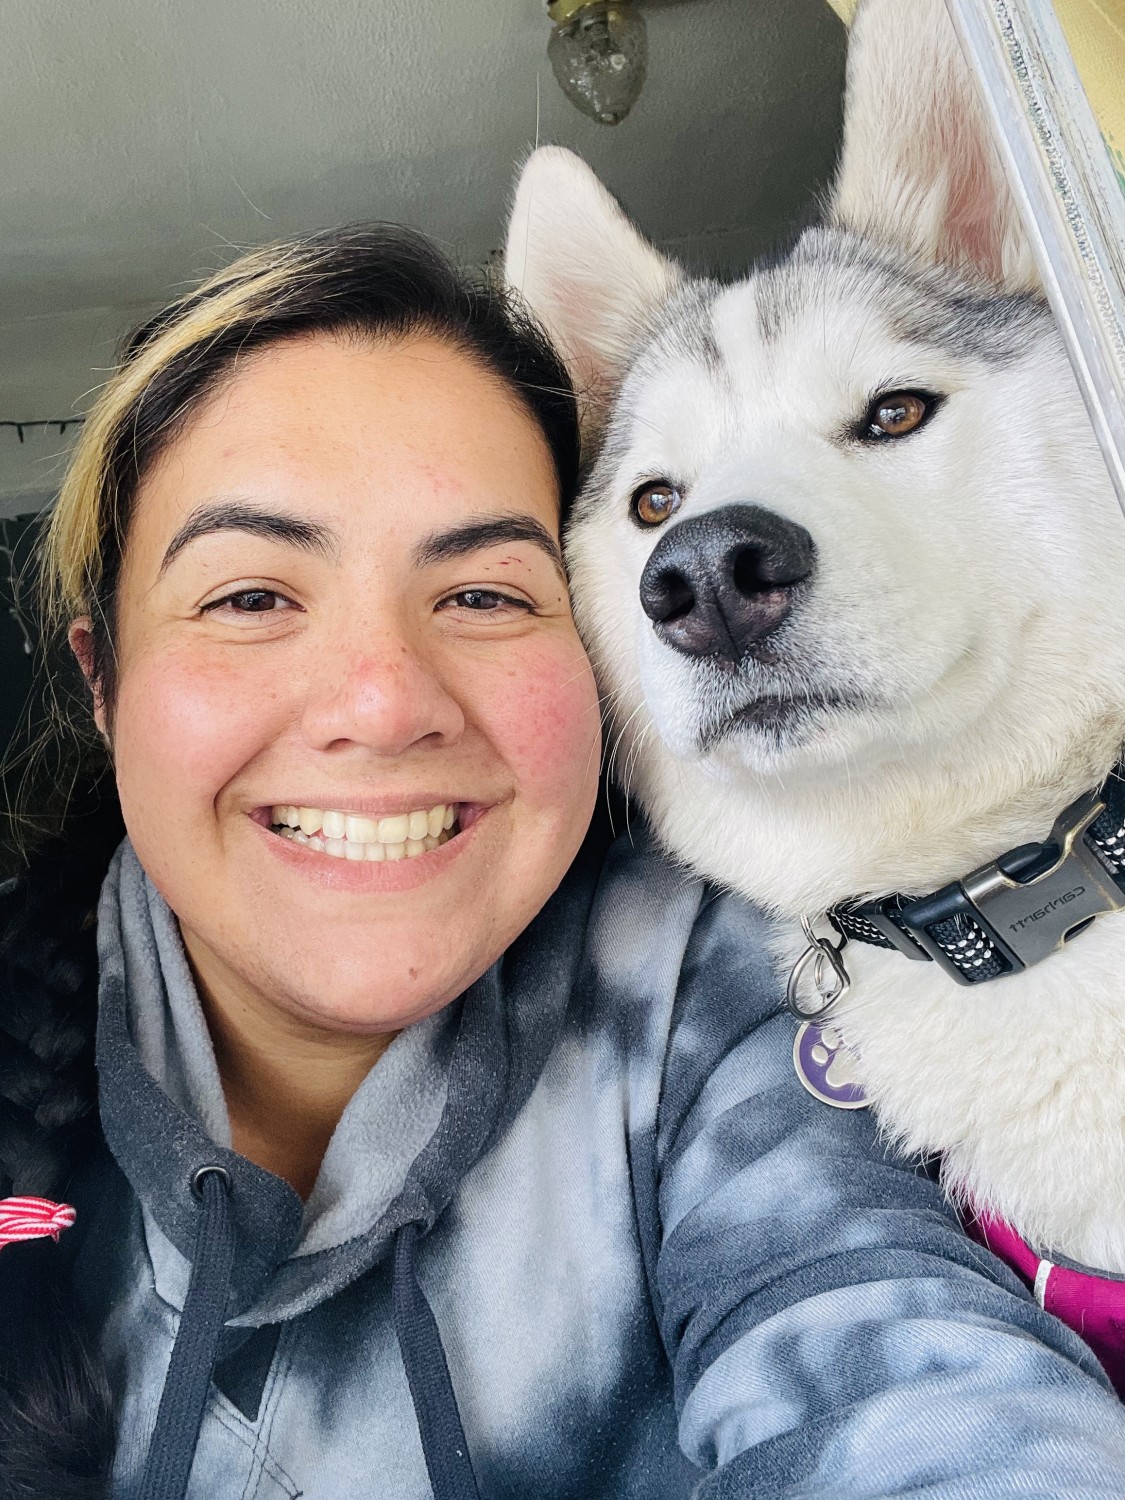 Itzel R - Camp Counselor, Veterinary Assistant in Training